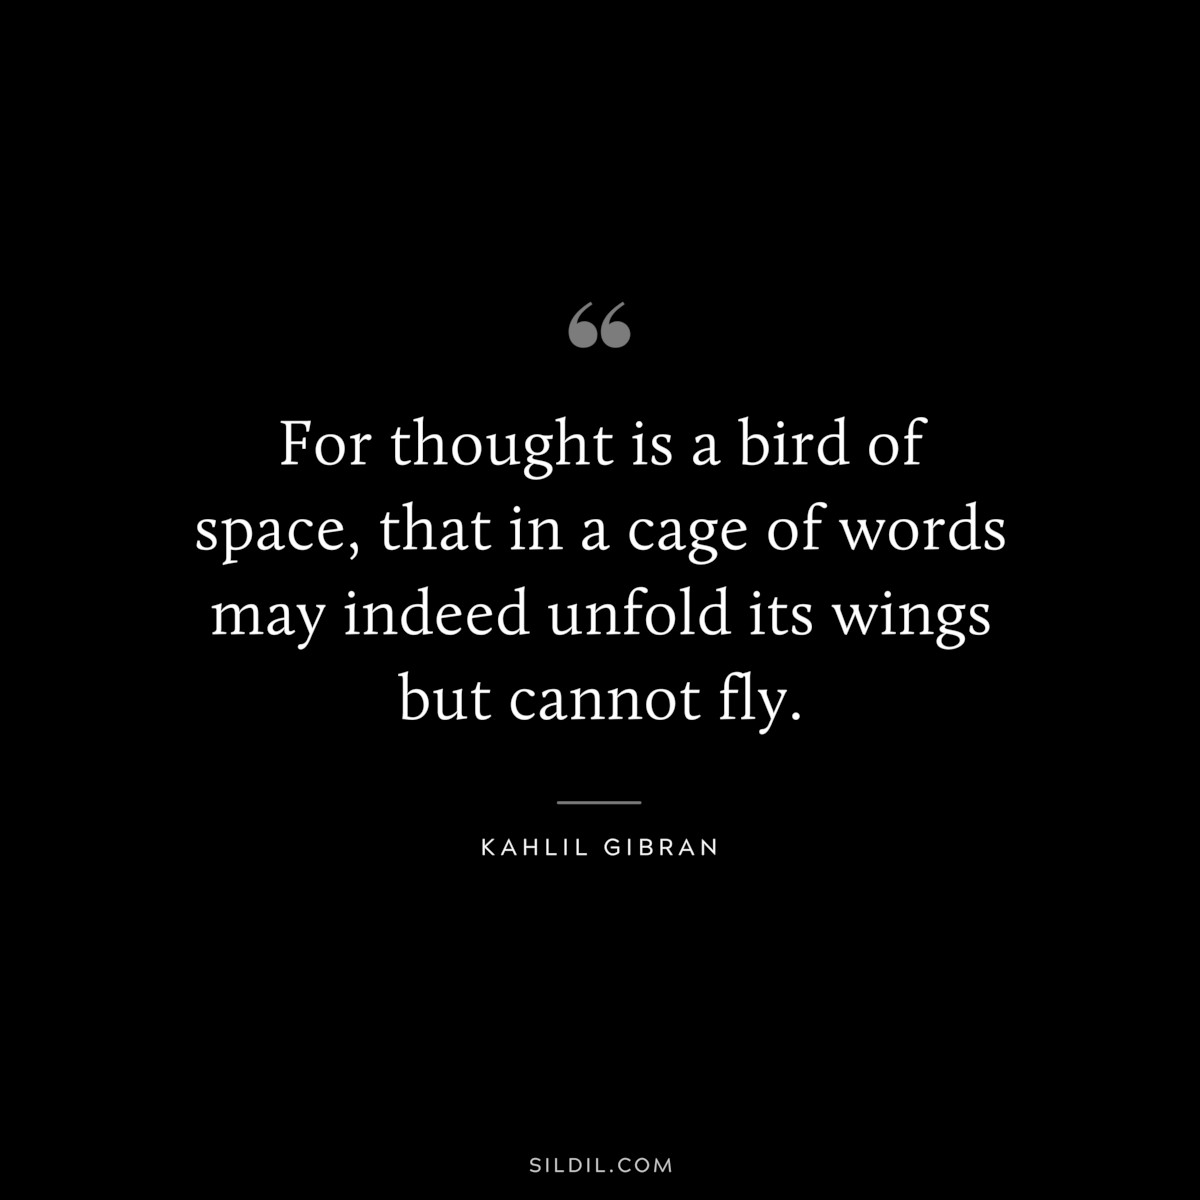 For thought is a bird of space, that in a cage of words may indeed unfold its wings but cannot fly. ― Kahlil Gibran